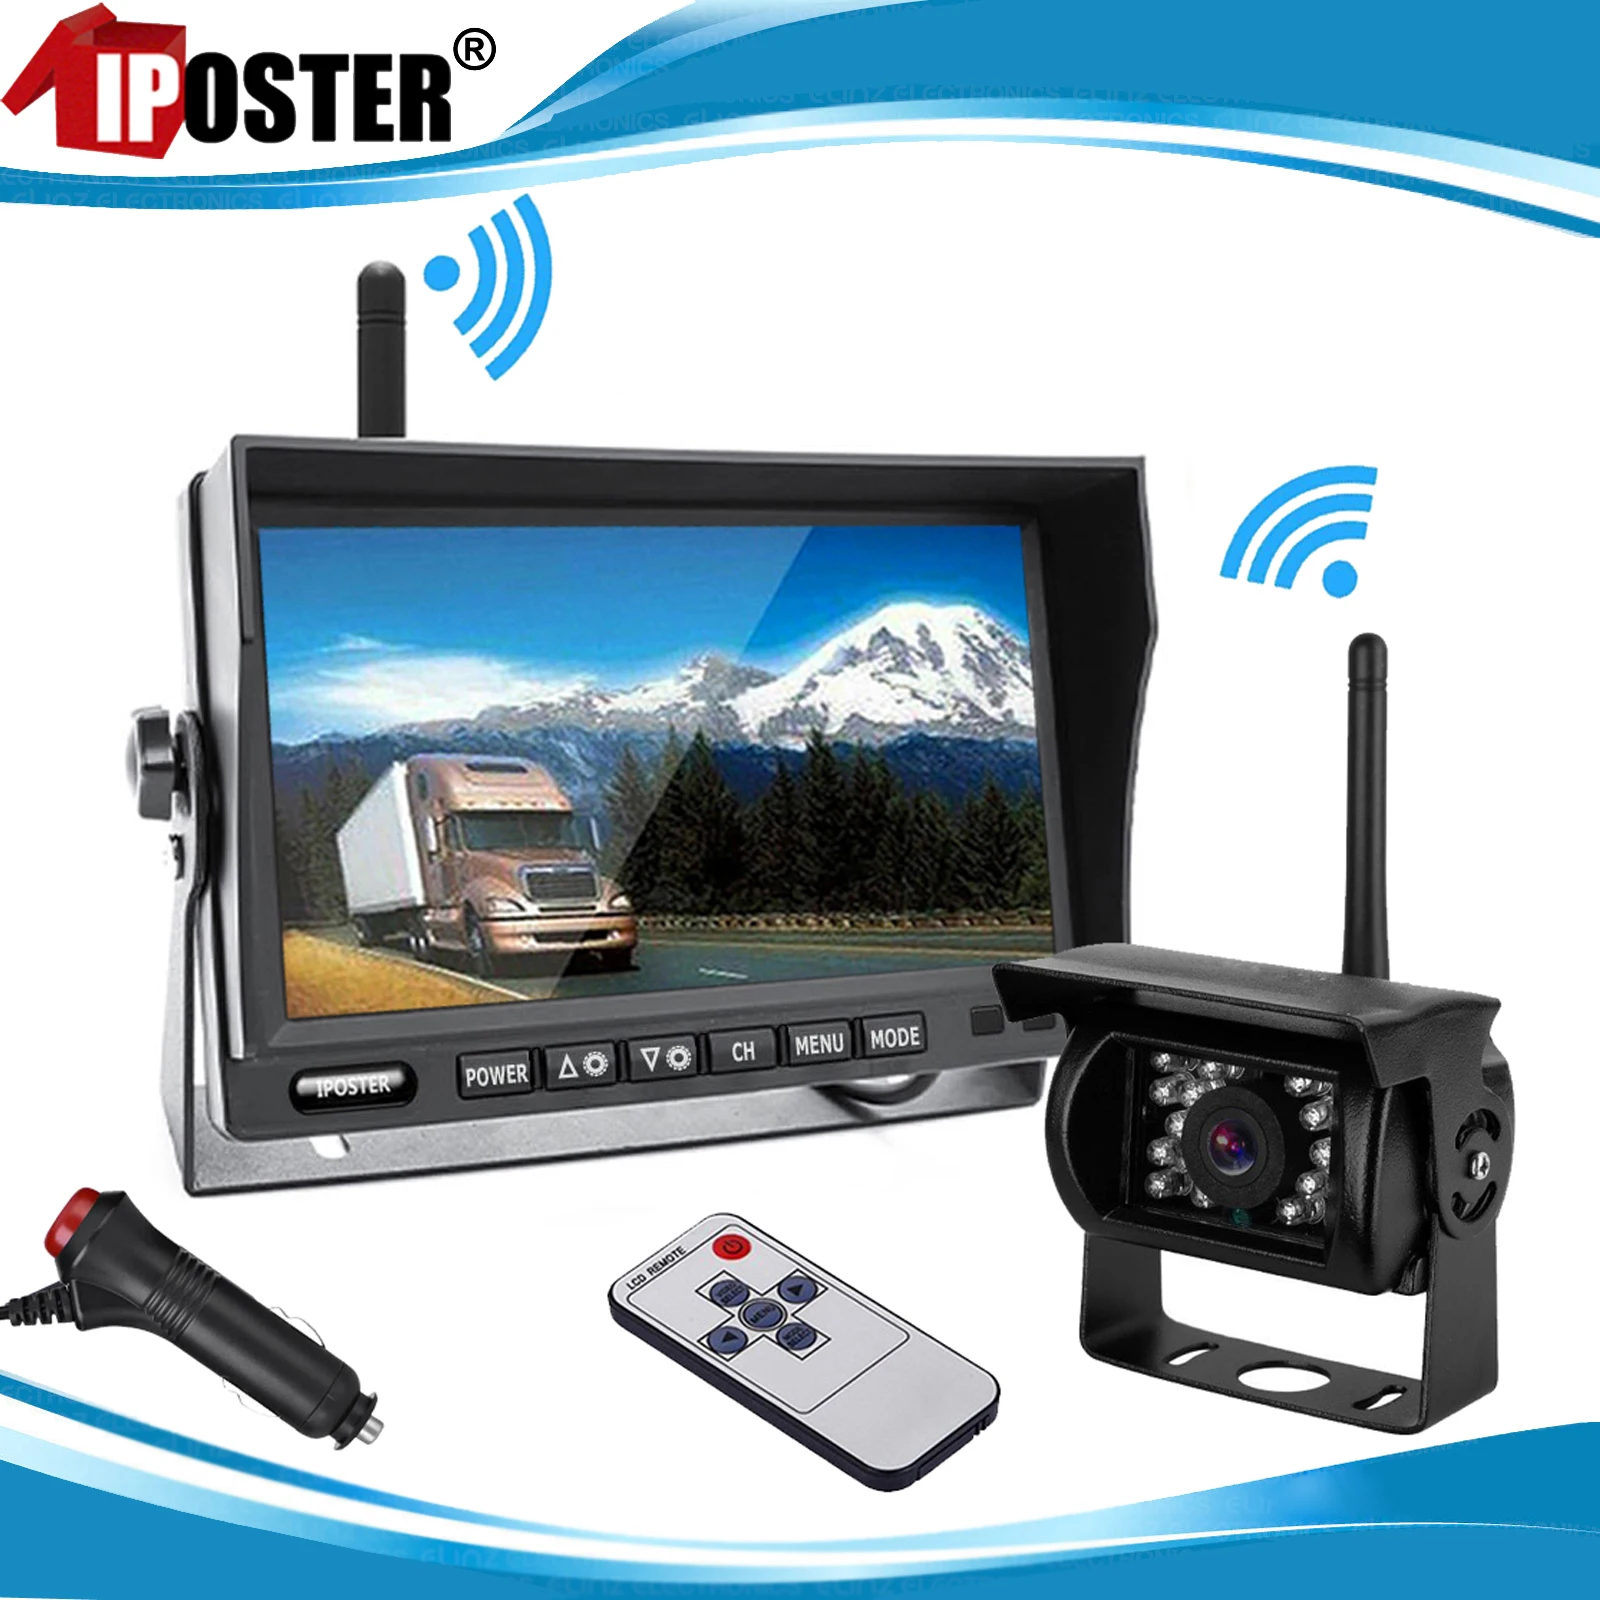 

iPoster Wireless 7" Monitor Backup Reversing Camera Night Vision Waterproof 2.4GHz 12-24v For 10m Vehicles